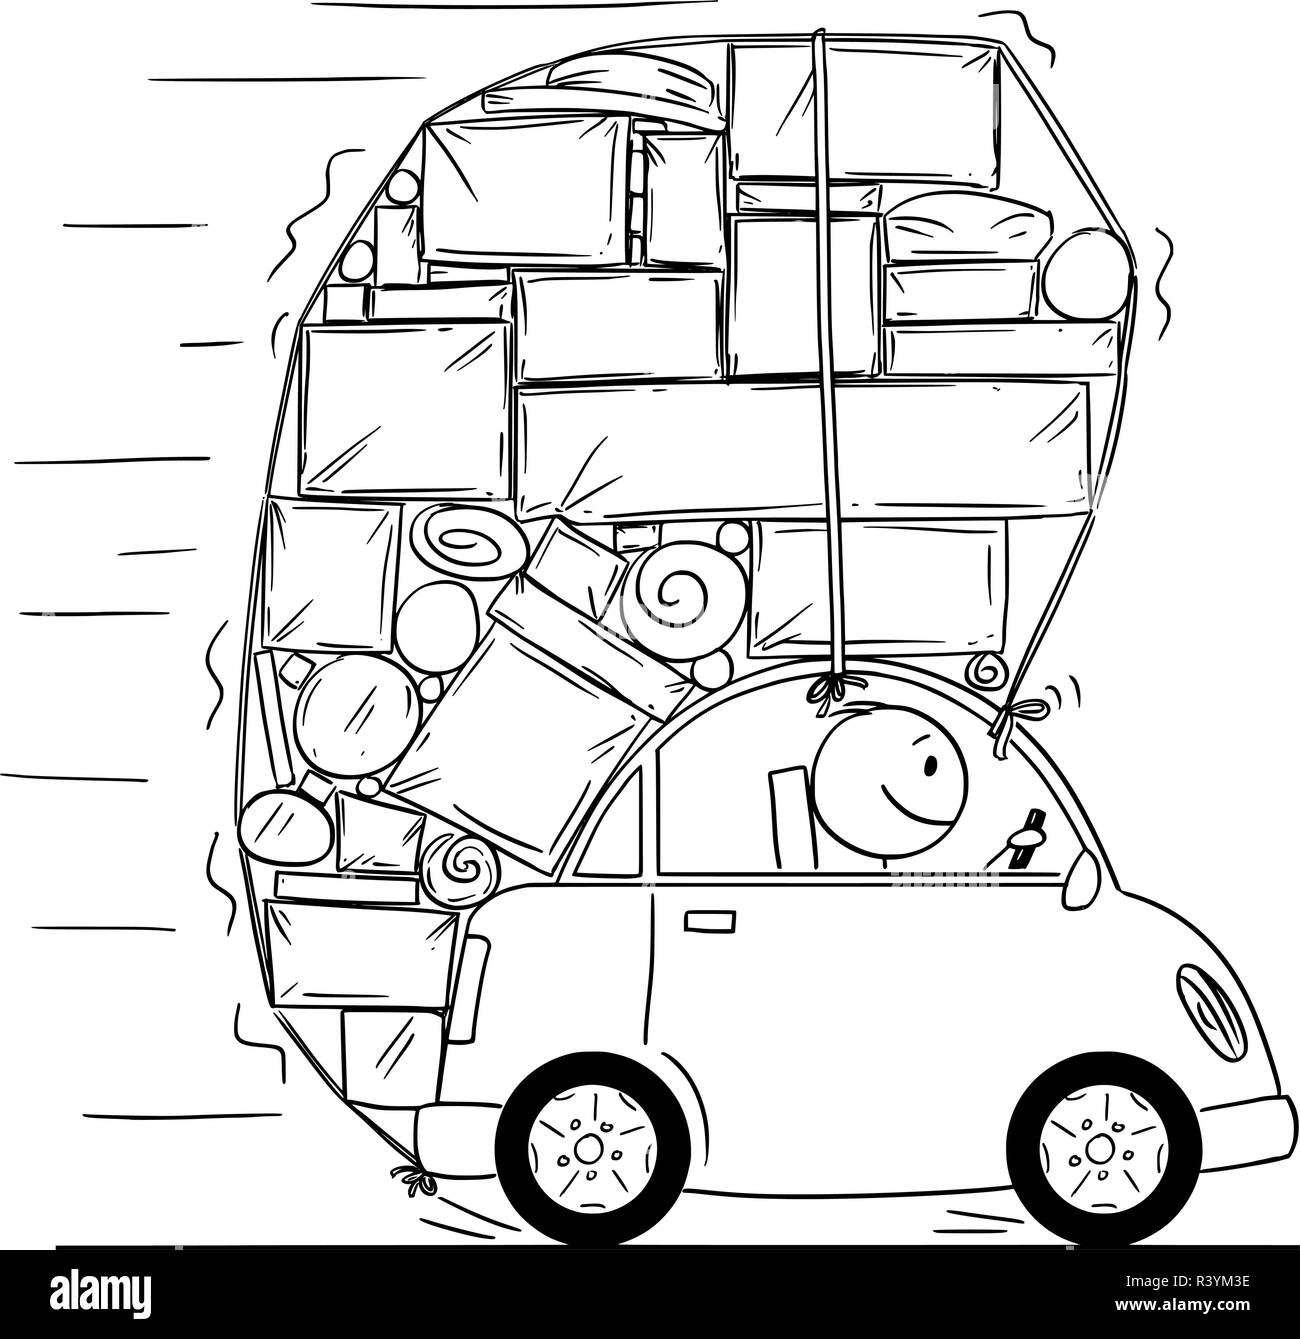 Cartoon Drawing of Car Overloaded by Boxes and Another Objects Stock Vector